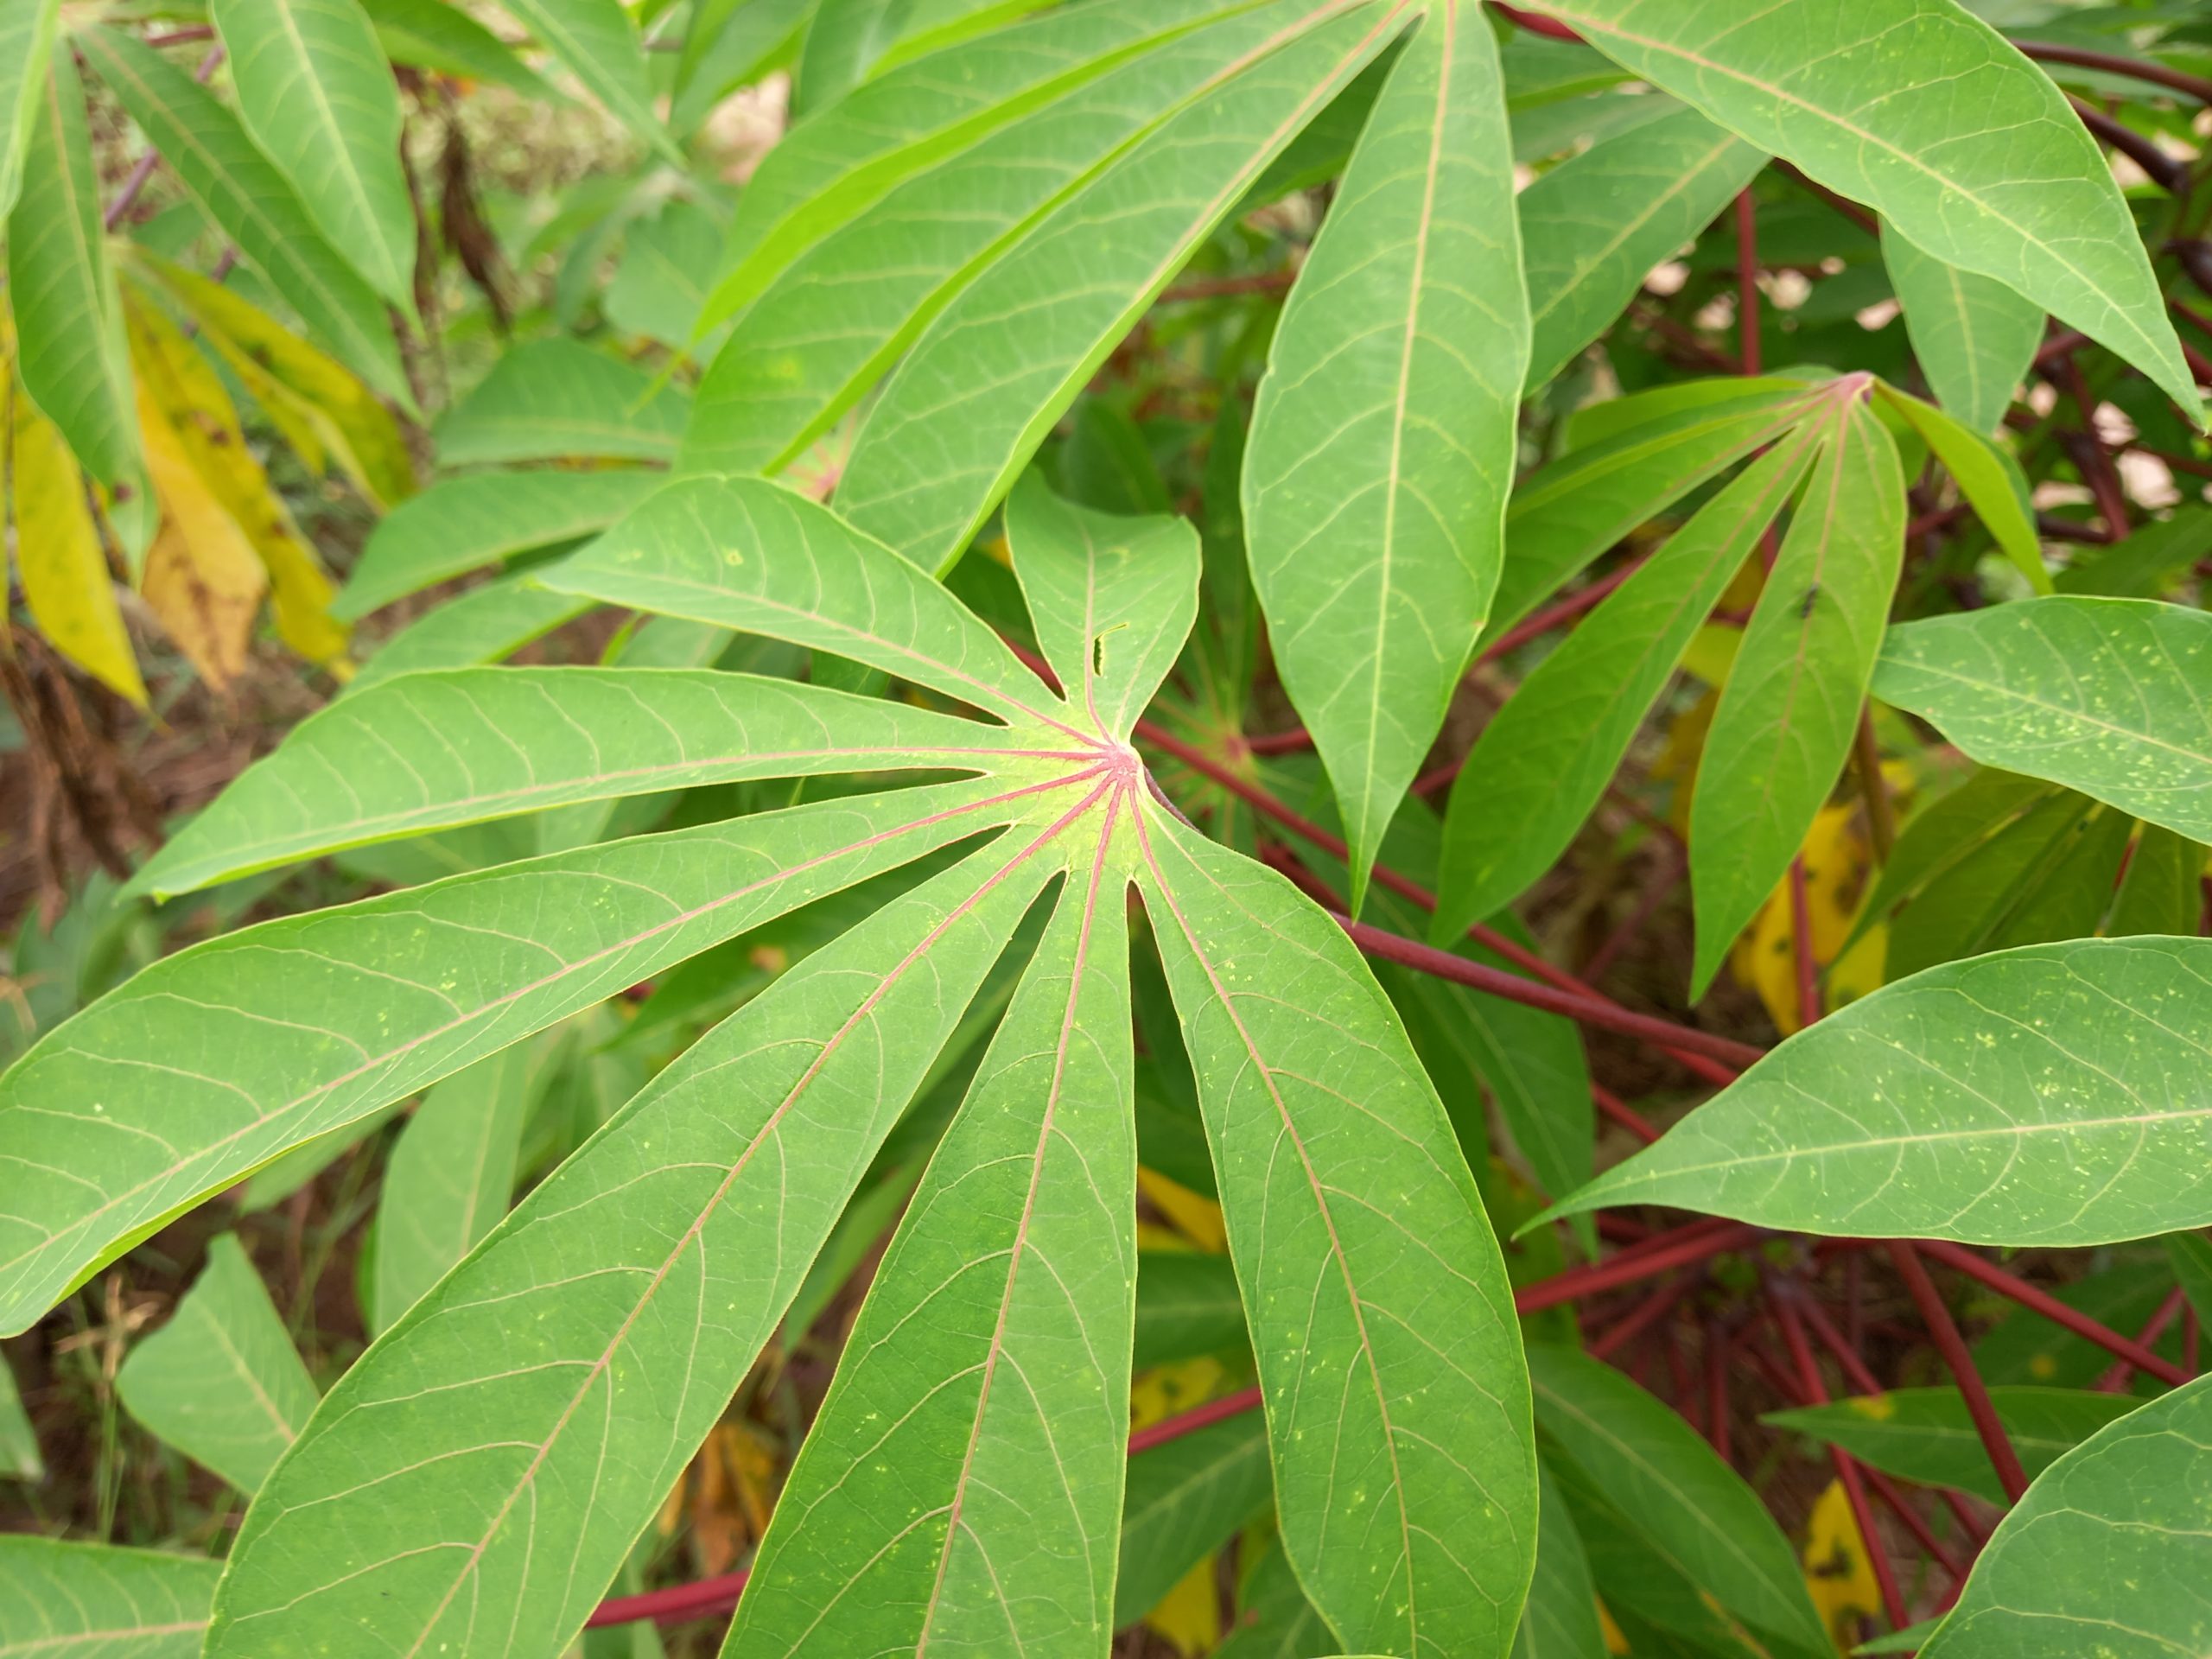 THE ECONOMIC, ENVIRONMENTAL, AND SOCIAL BENEFITS OF PLANTING CASSAVA